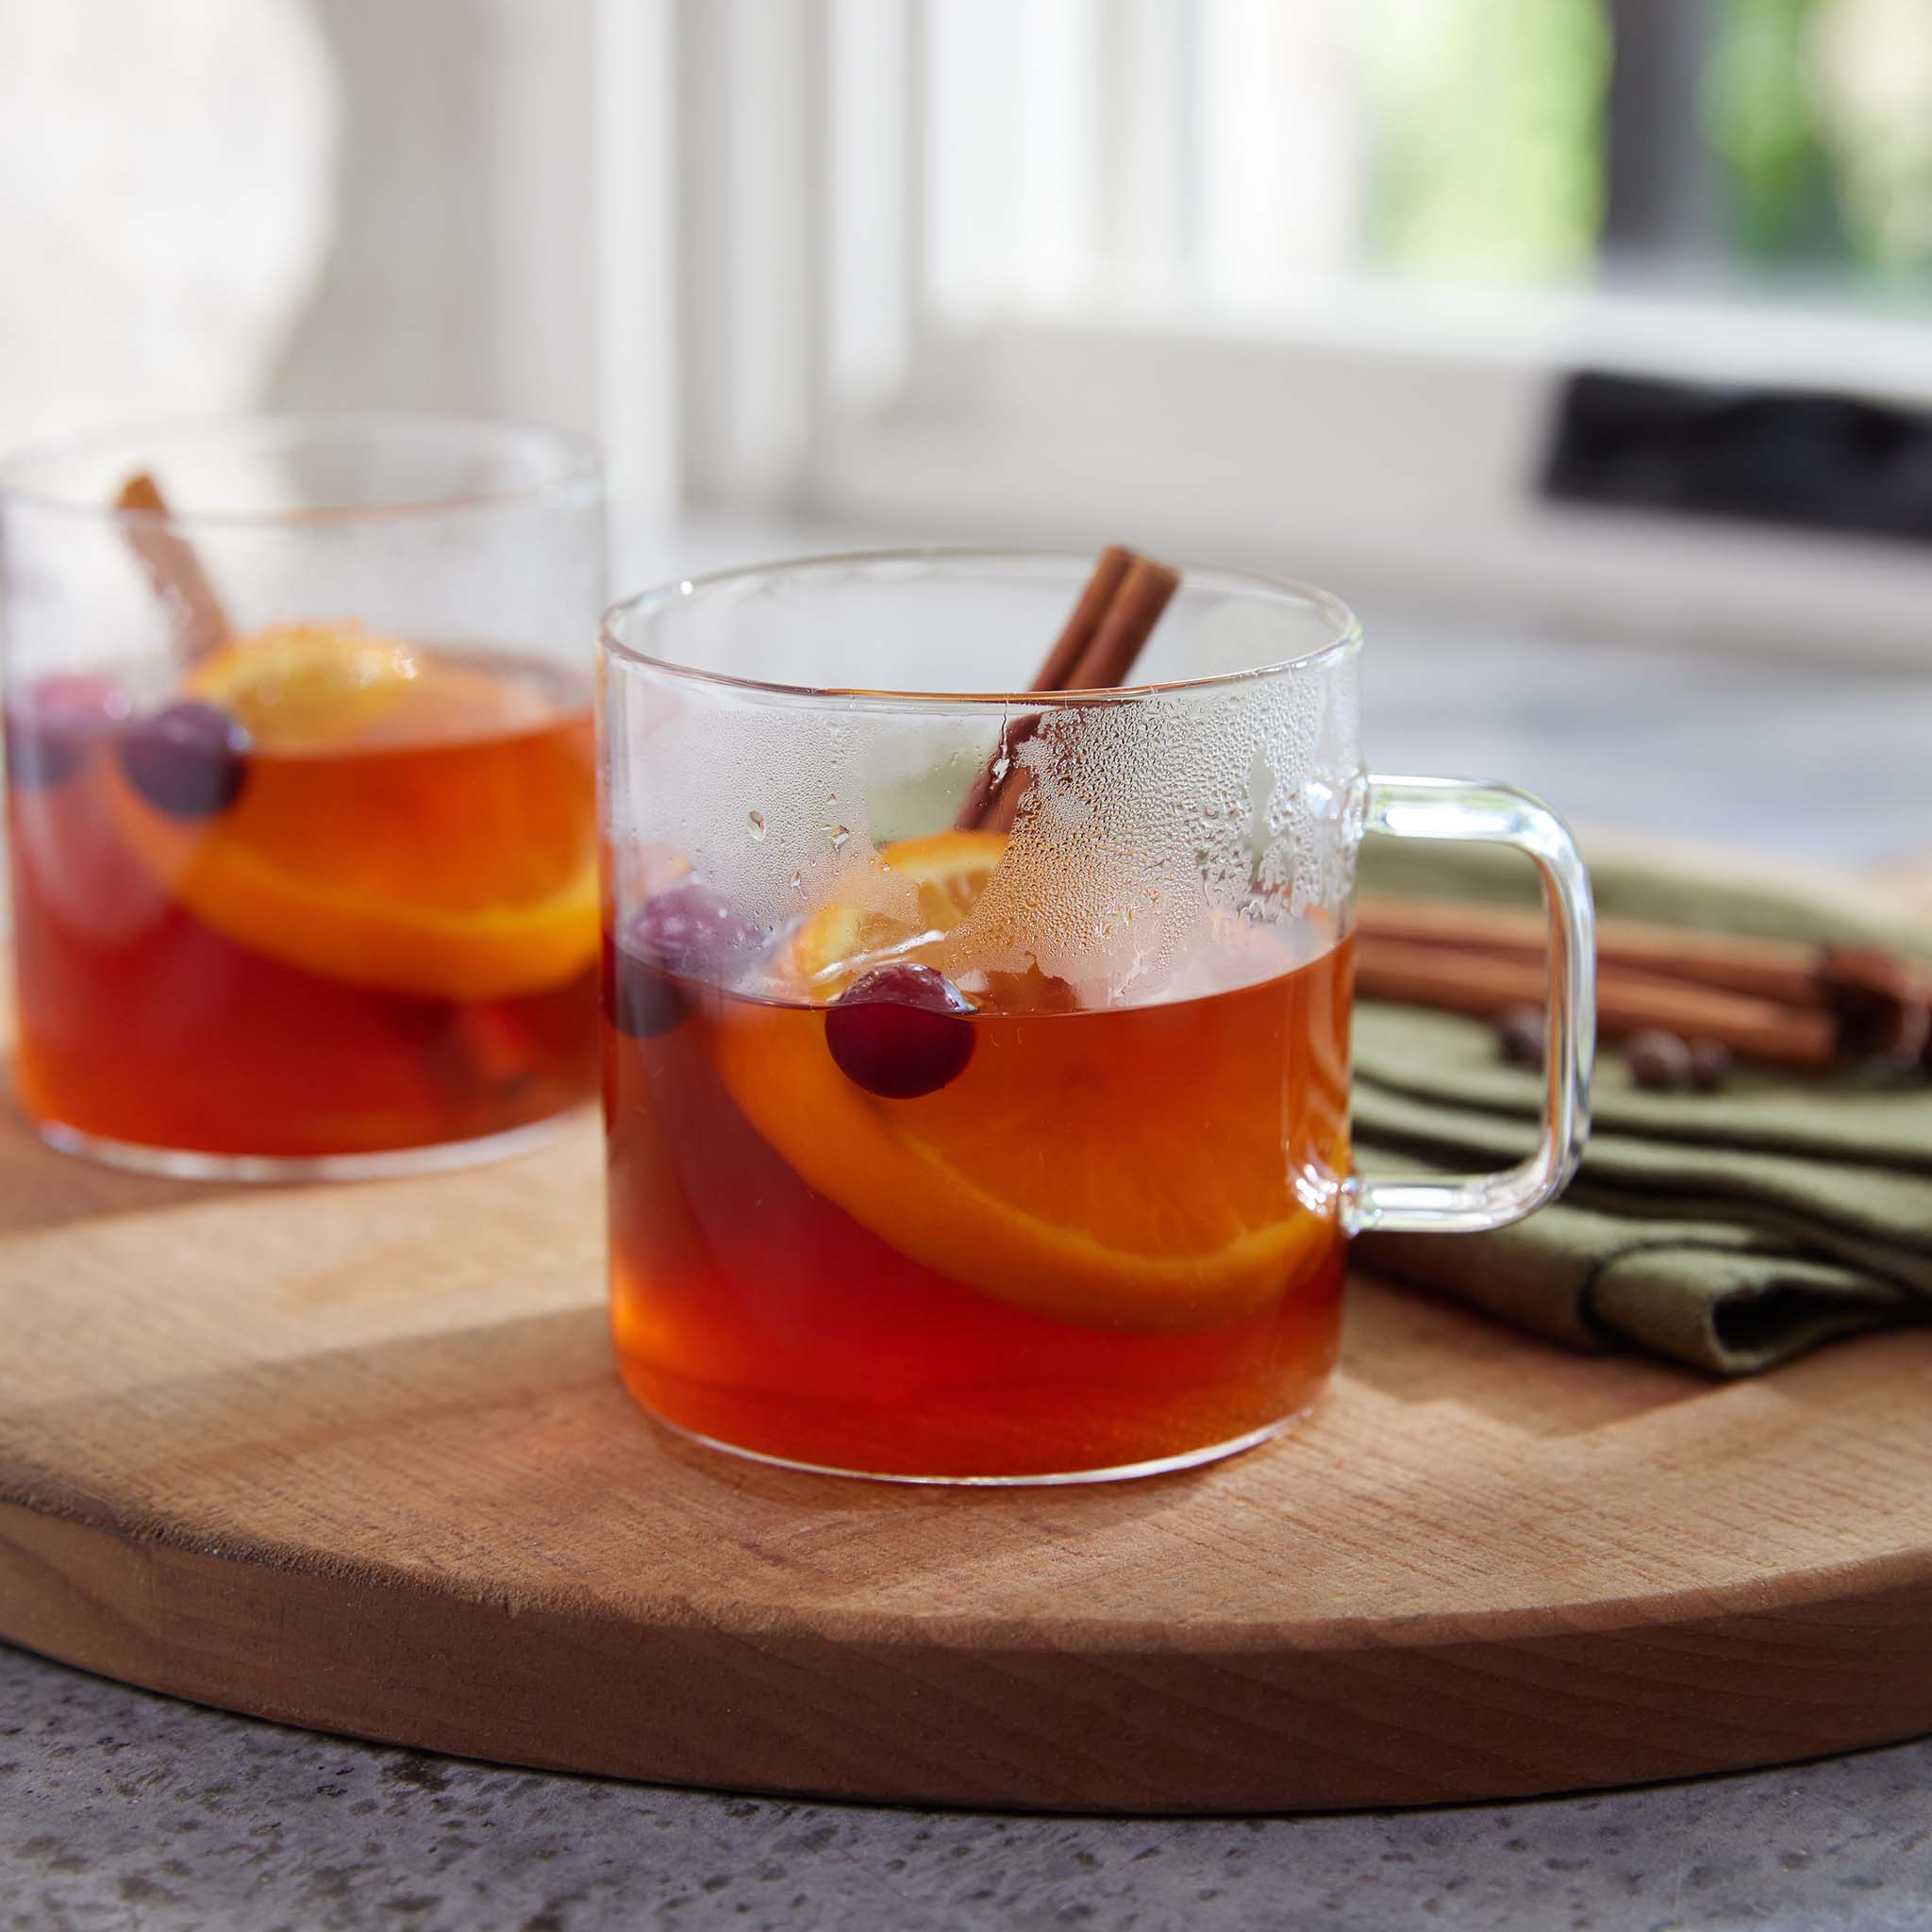 Joanna Gaines's Mulled Cider